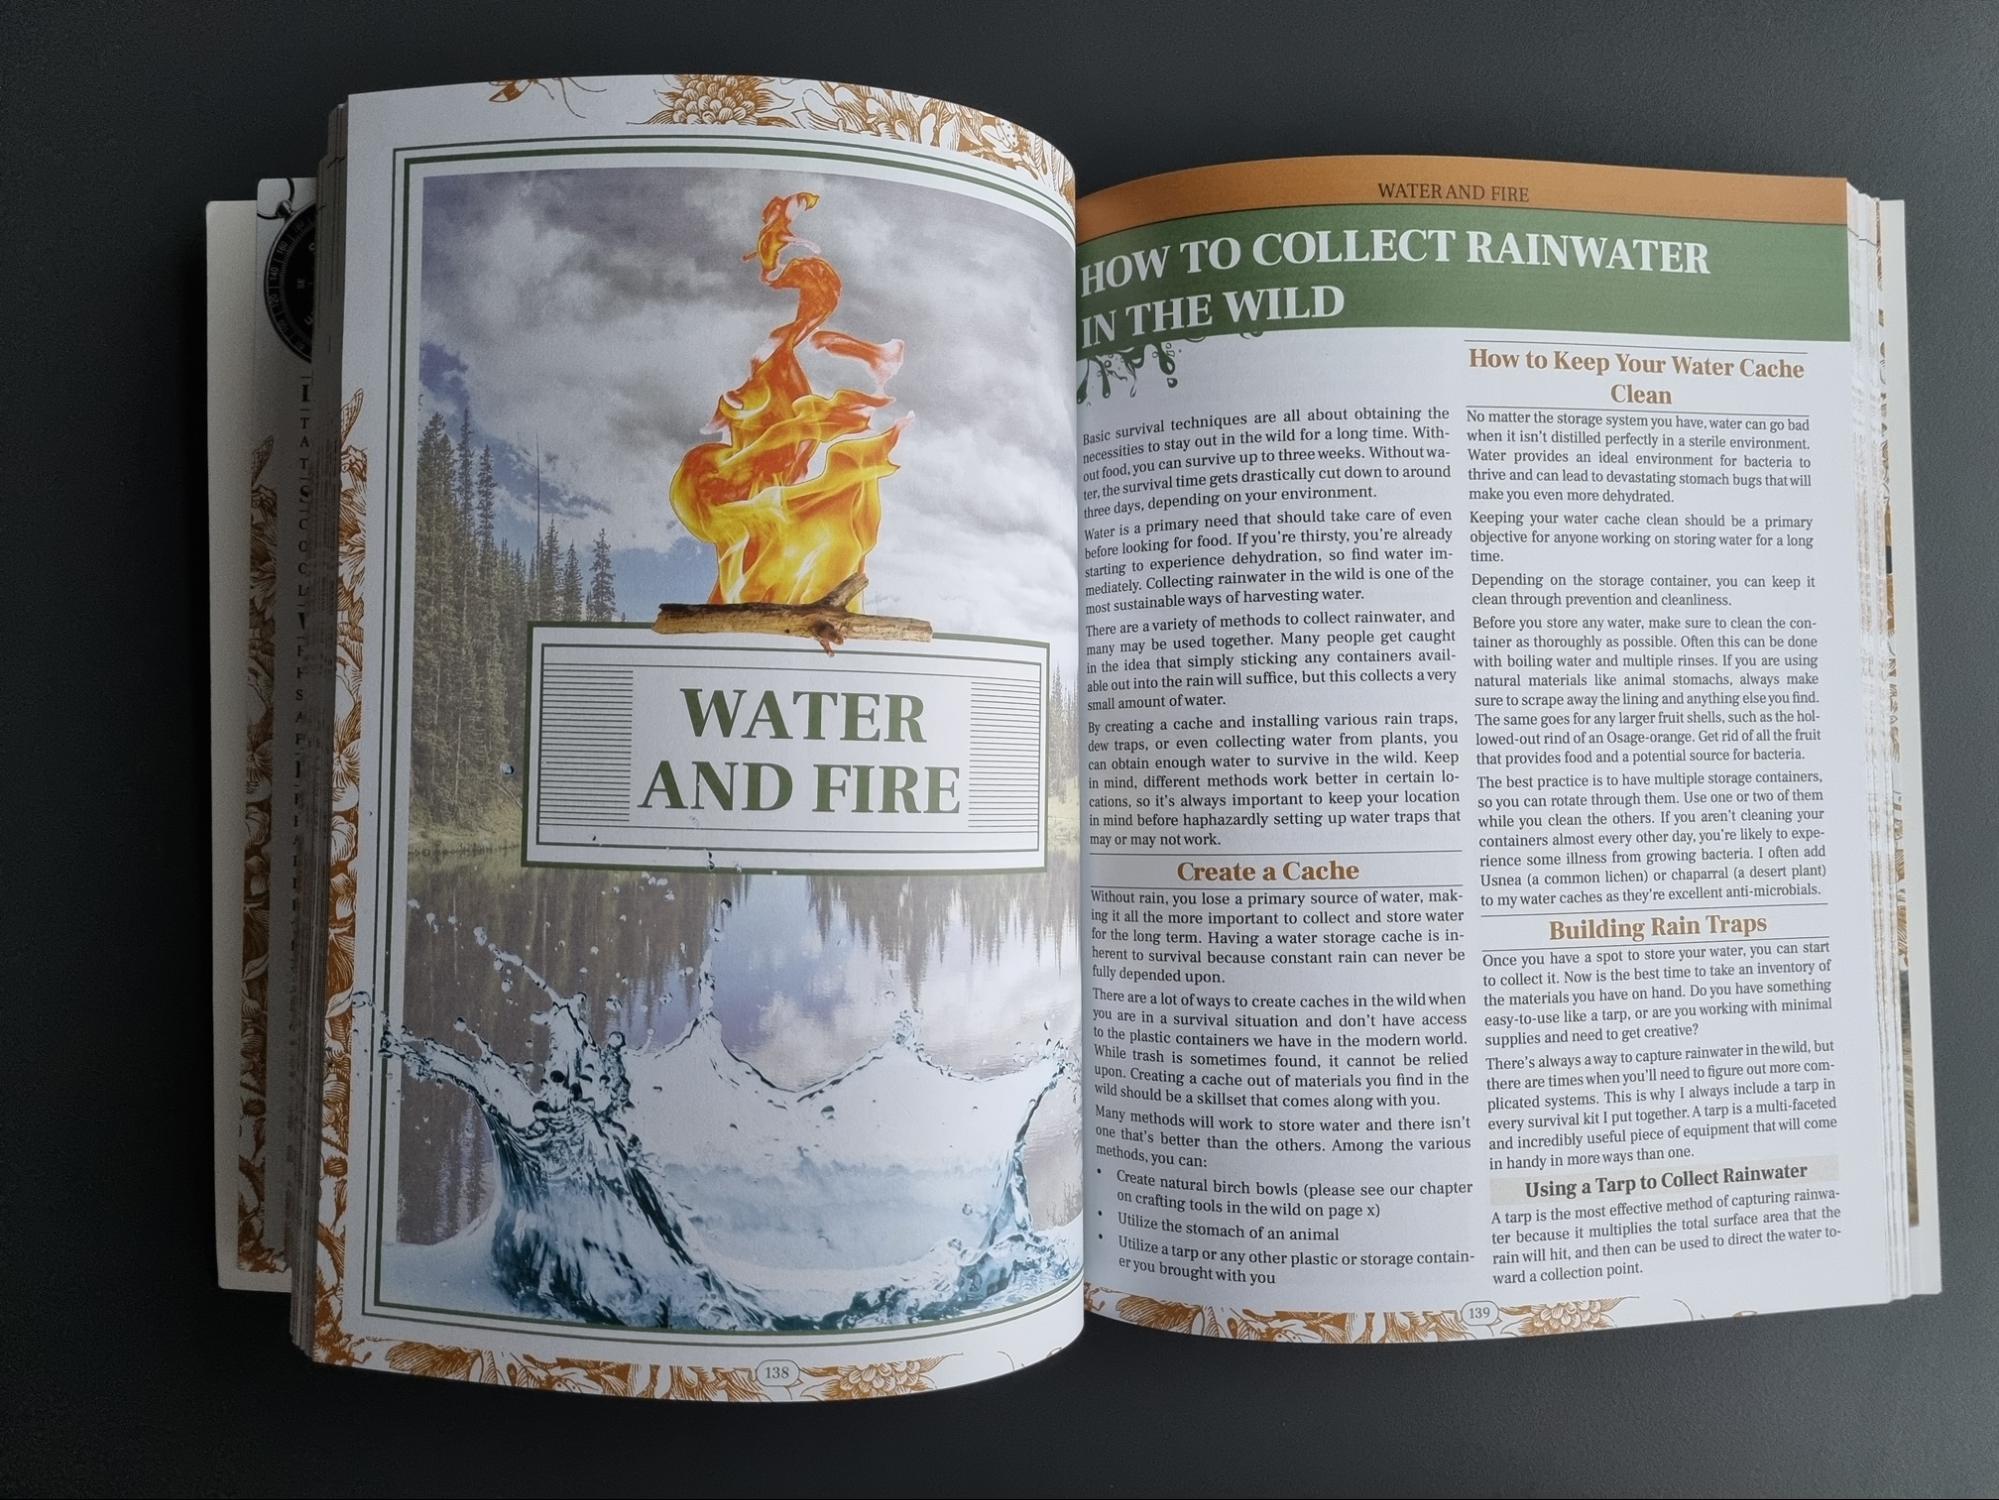 Water and Fire chapter in Long Term Survival Guide